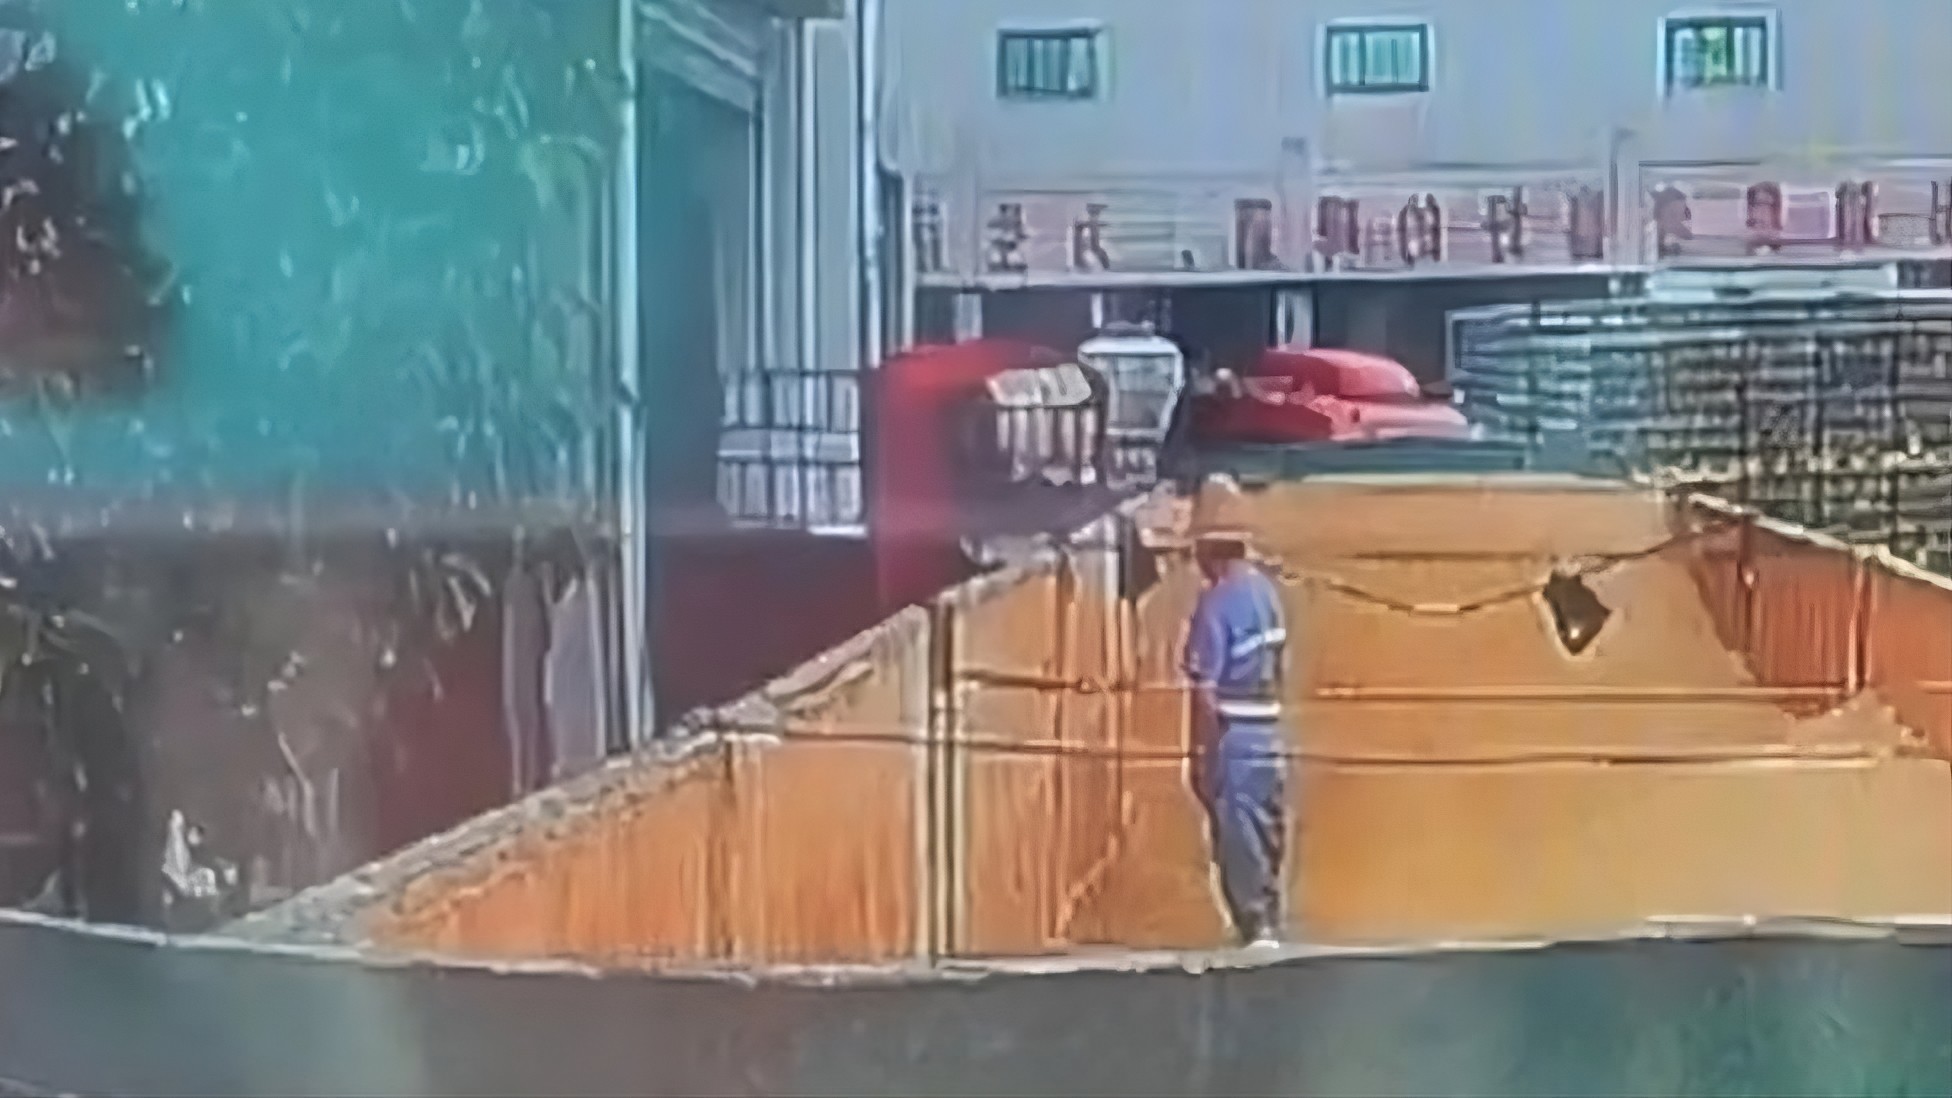 A still from the viral video allegedly showing a worker at a Tsingtao factory urinating in vat of raw ingredients. Photo:X/@ianbremmer
